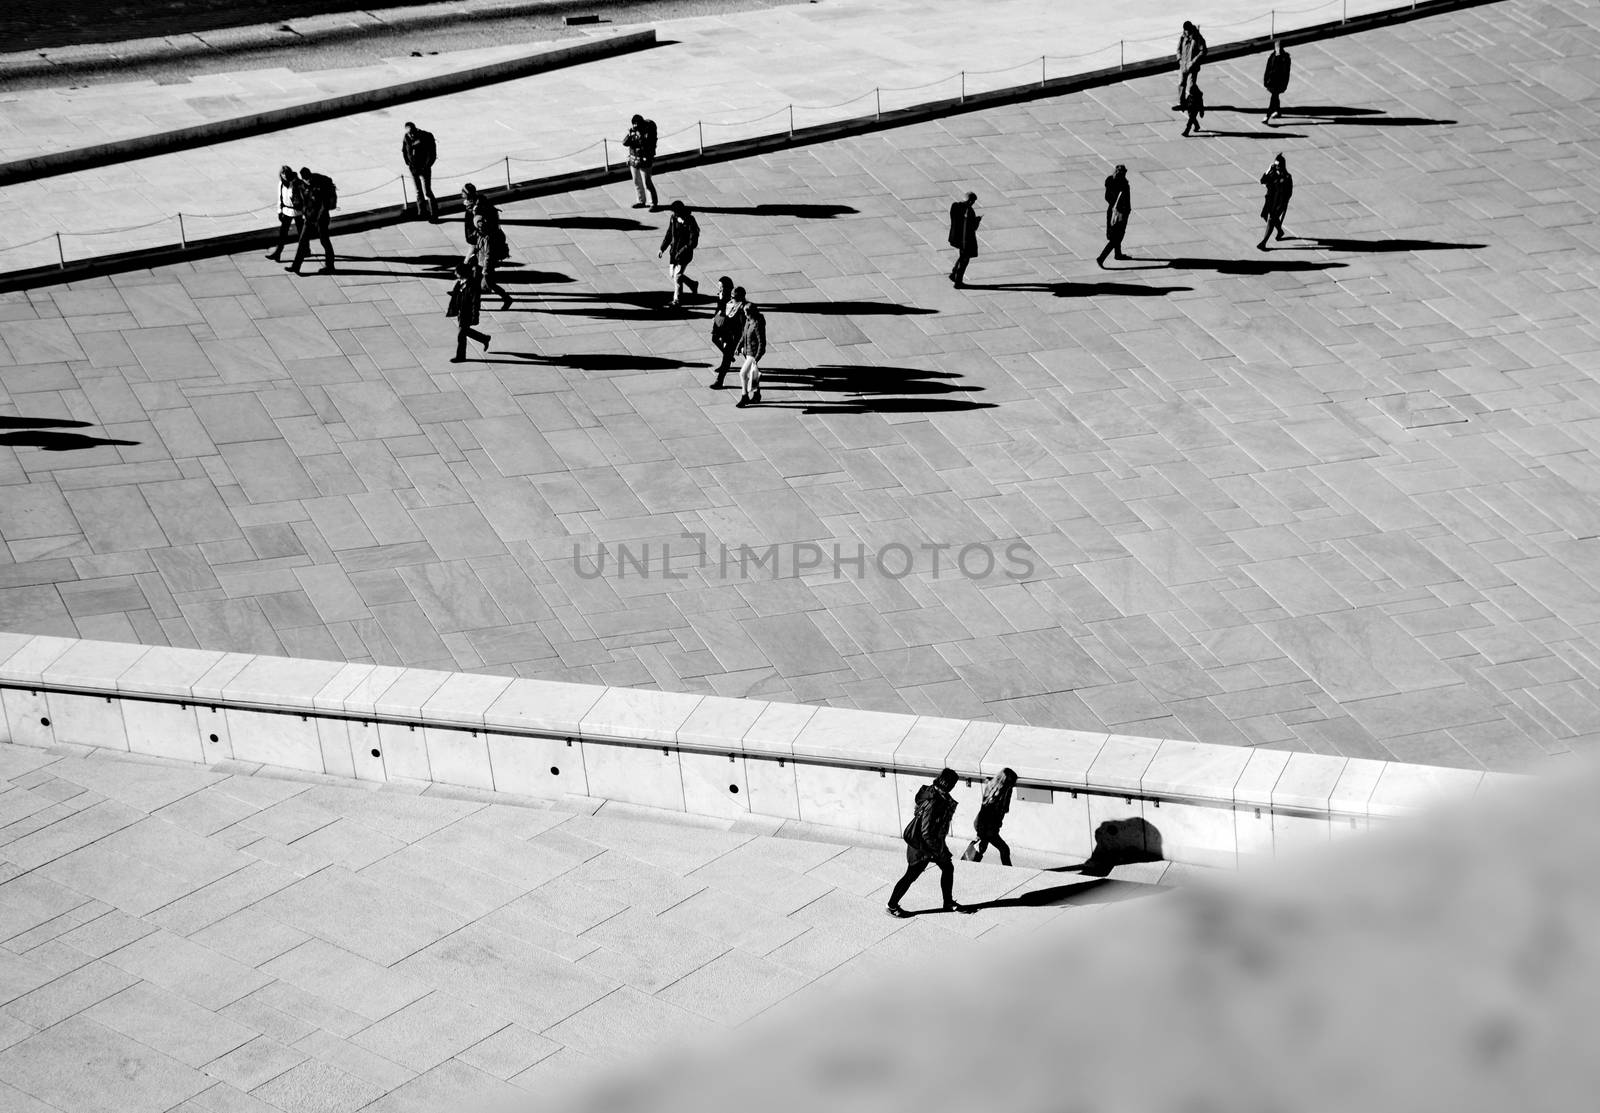 OSLO - MARCH 21: People hanging around in Opera house in Oslo by anderm